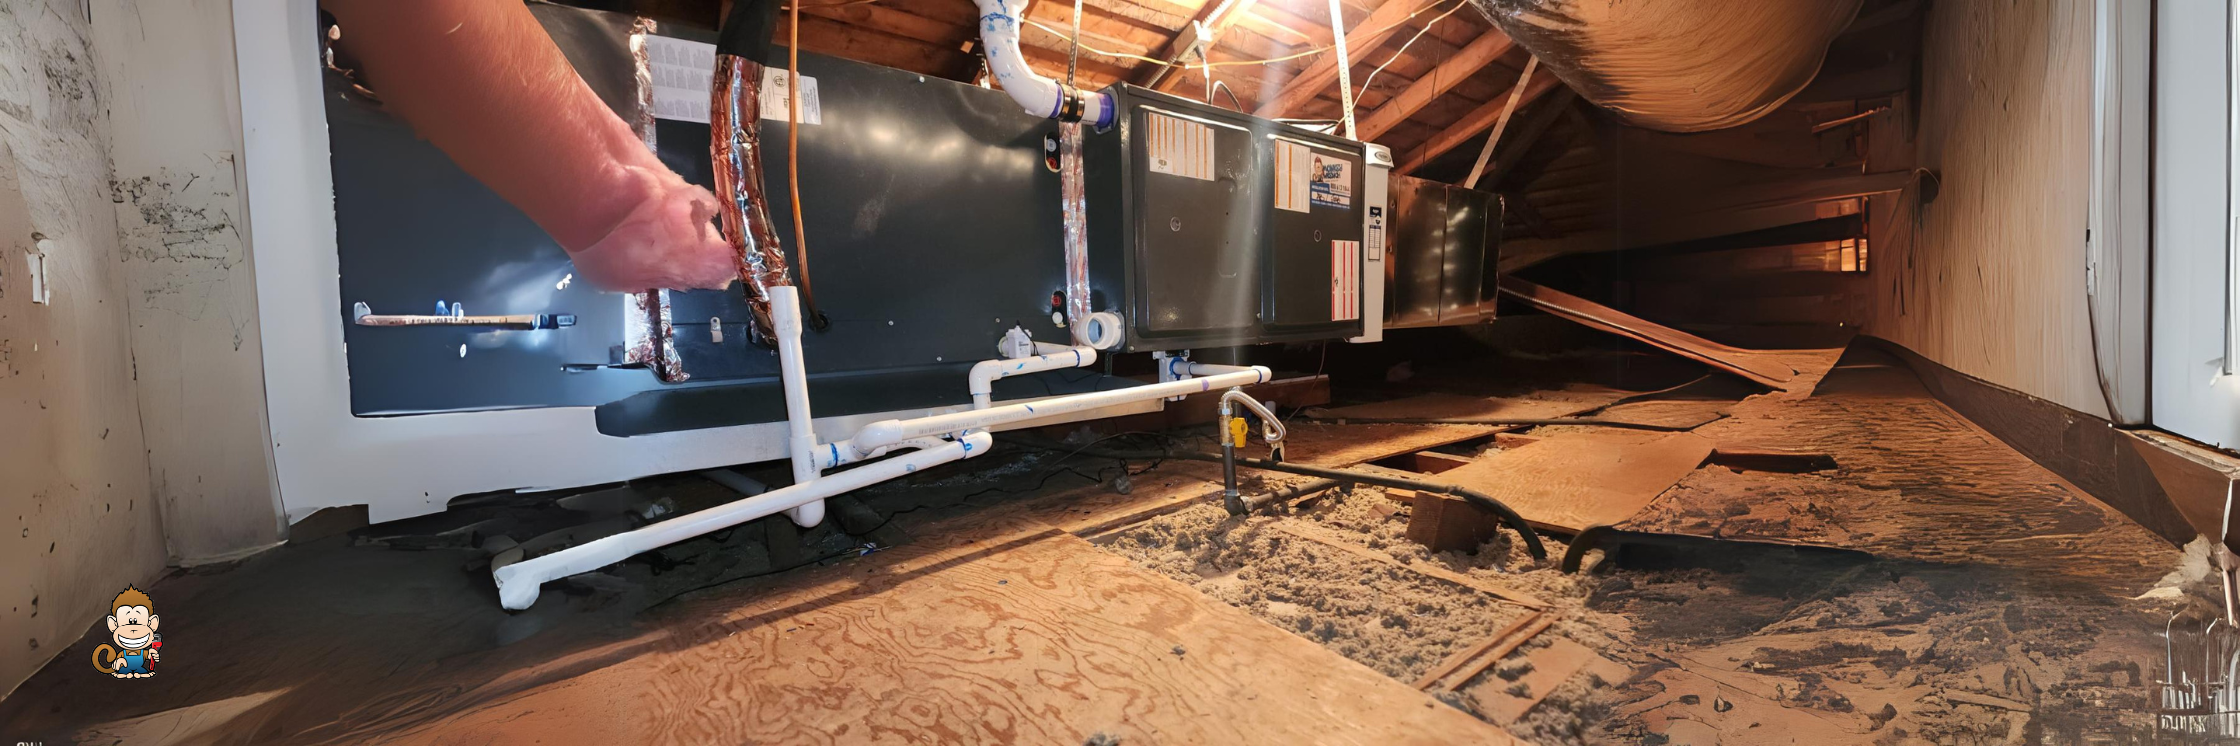 Top 5 Signs Your Home Needs a Furnace Replacement